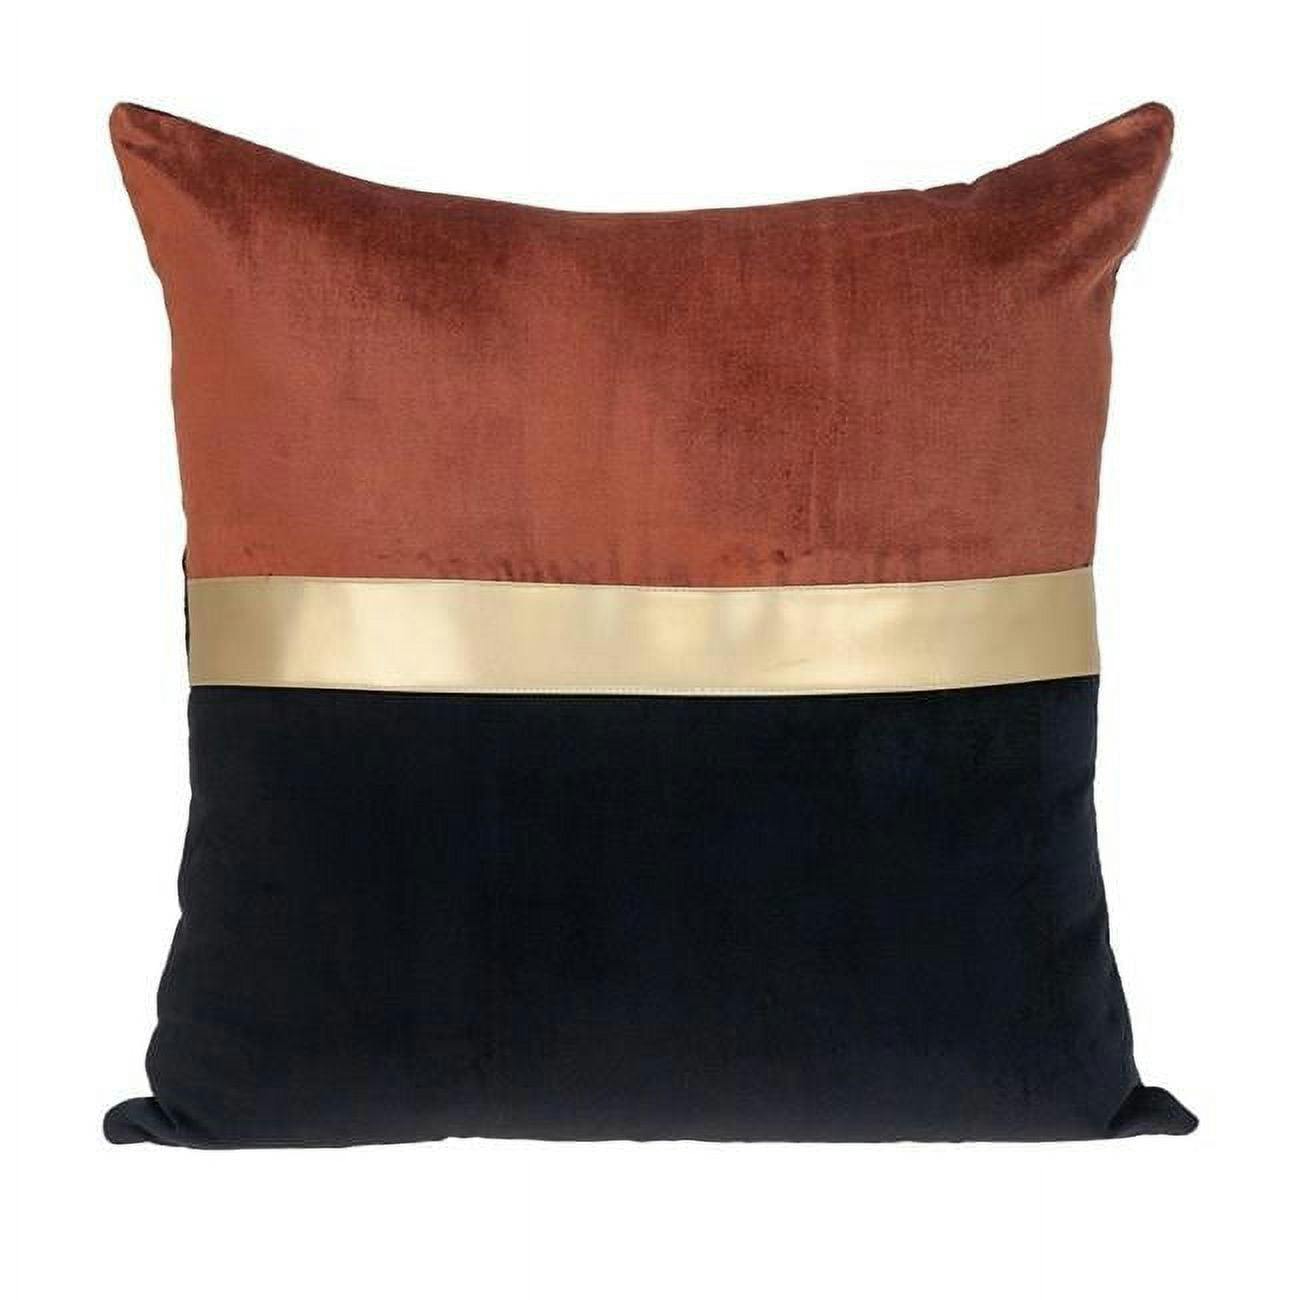 Brown and Black Tufted Velvet Square Pillow Set with Gold Band